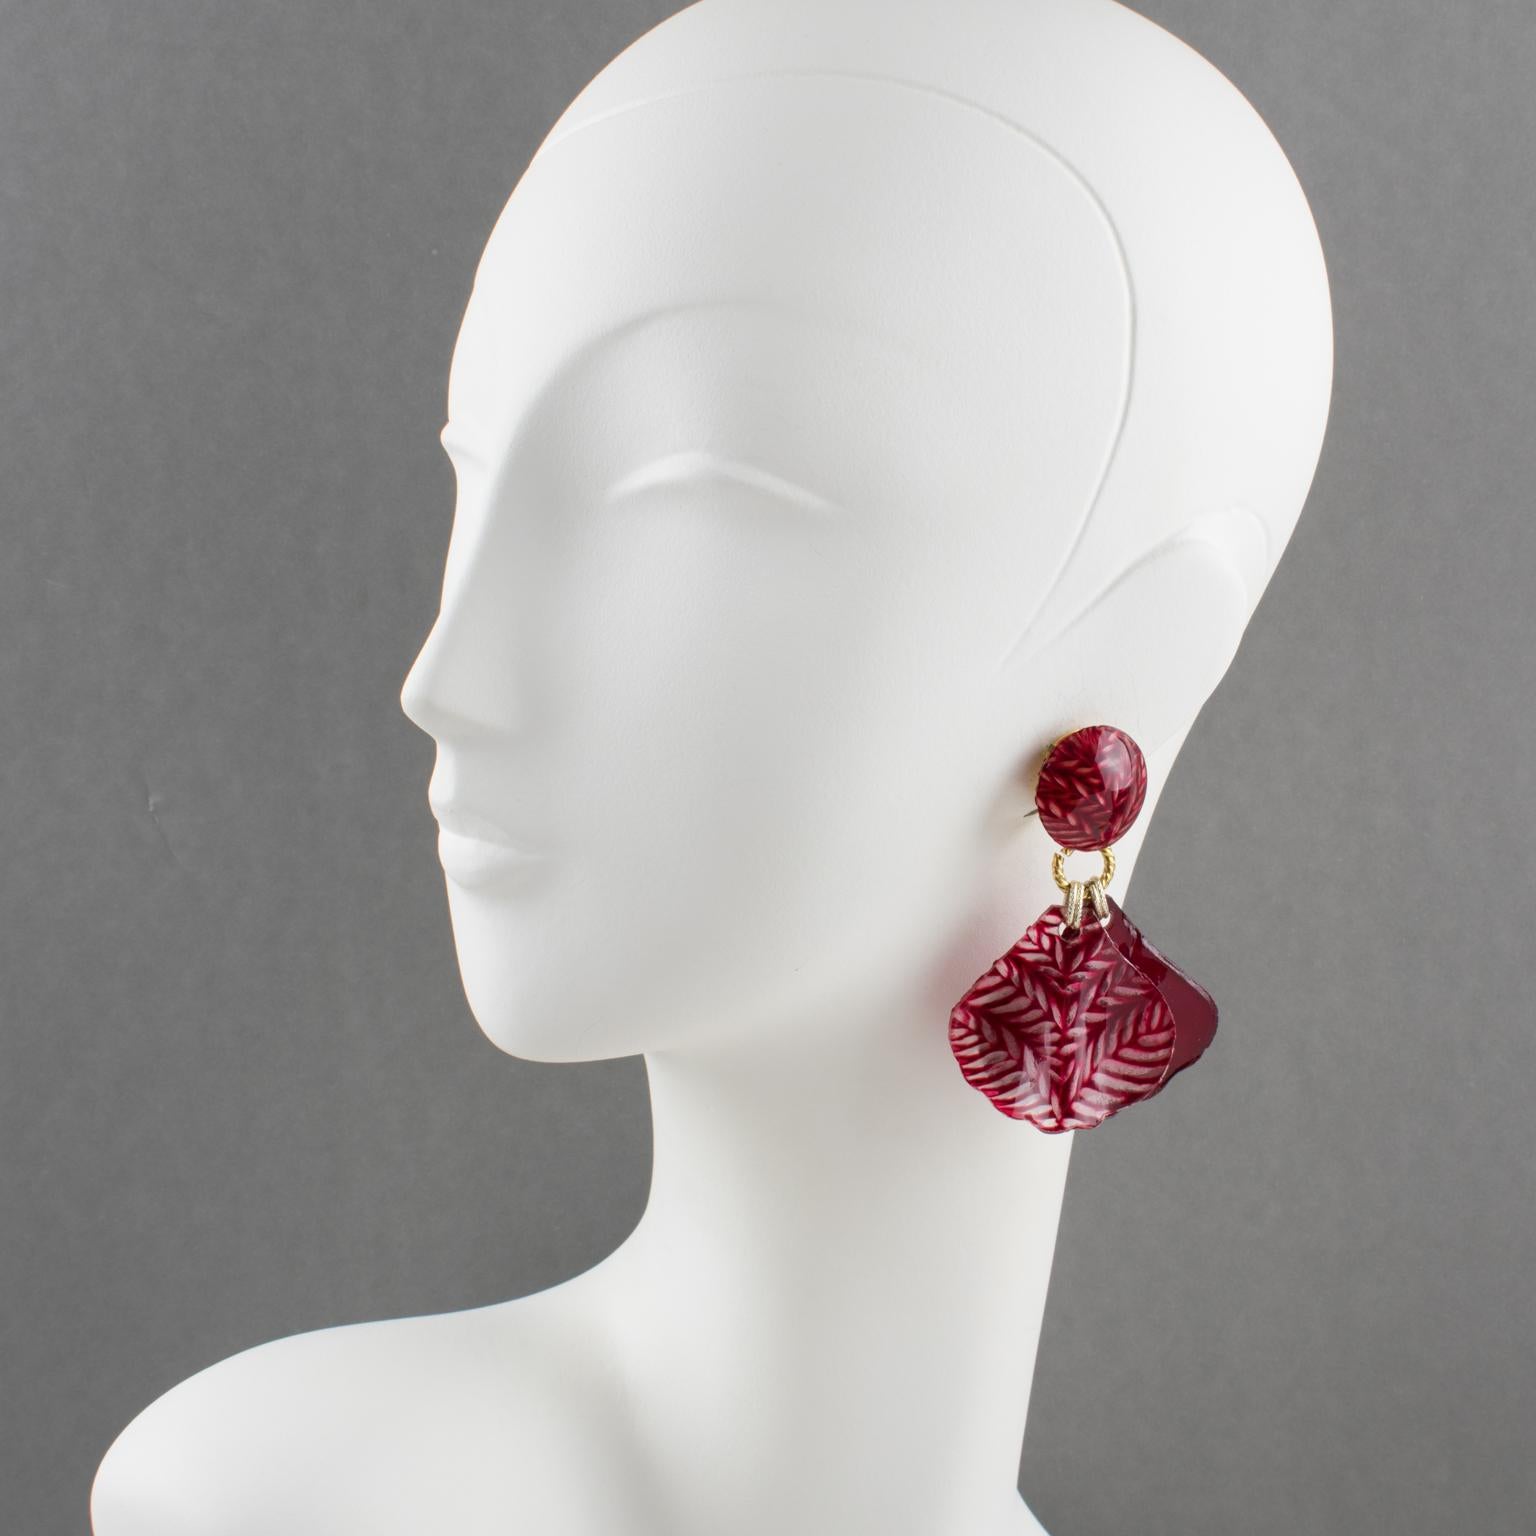 Cilea Paris designed these cute clip-on earrings for French Designer Francoise Montague Paris. They feature a massive dangle shape in burgundy red resin with a waved petals design, one with a glossy plain color, the other one translucent with a